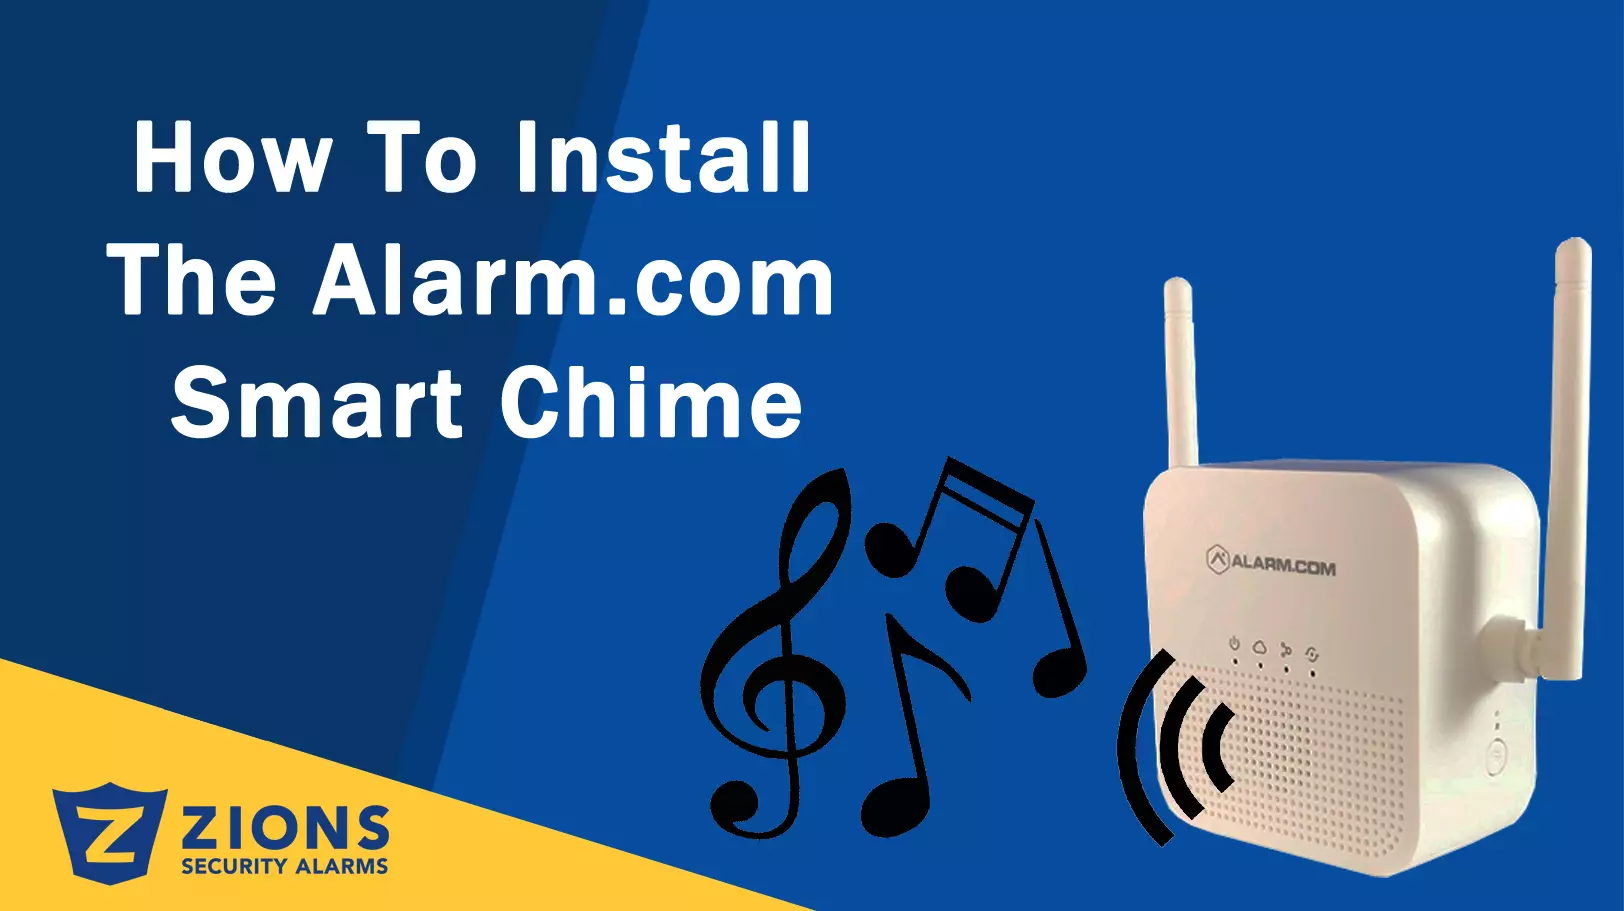 How to install the new Alarm.com Smart Chime